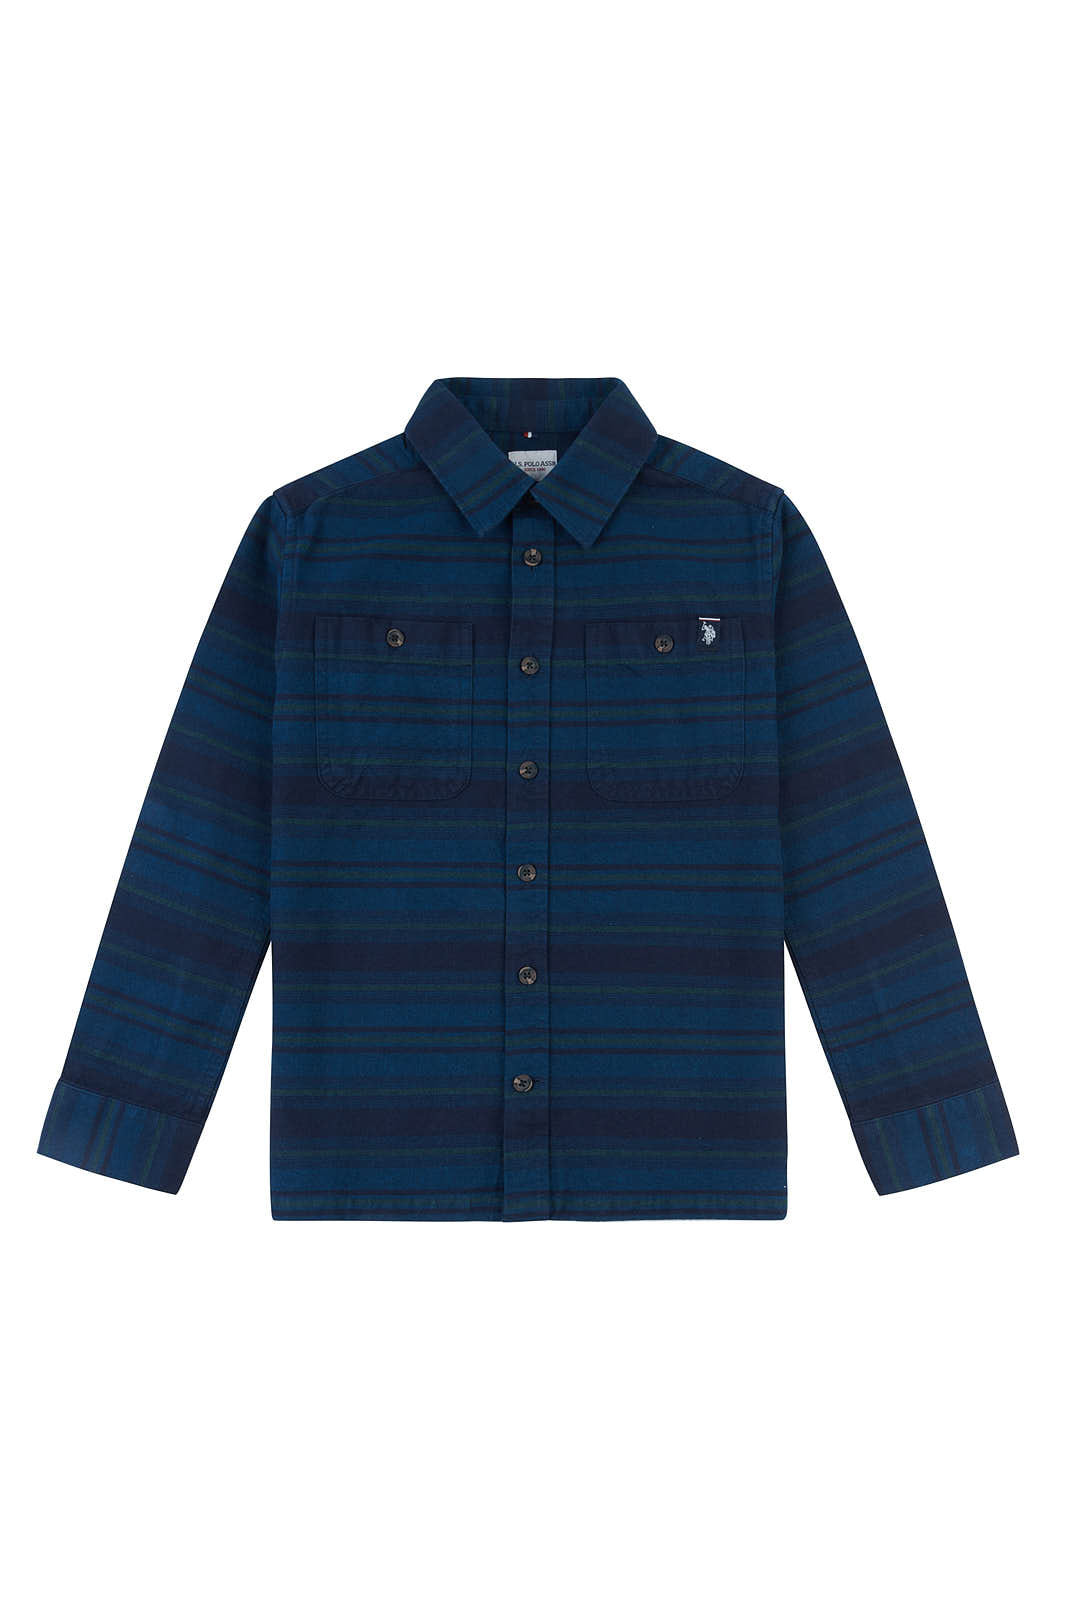 U.S. Polo Assn. Boys Ombre Brushed Stripe Overshirt in Navy Blue